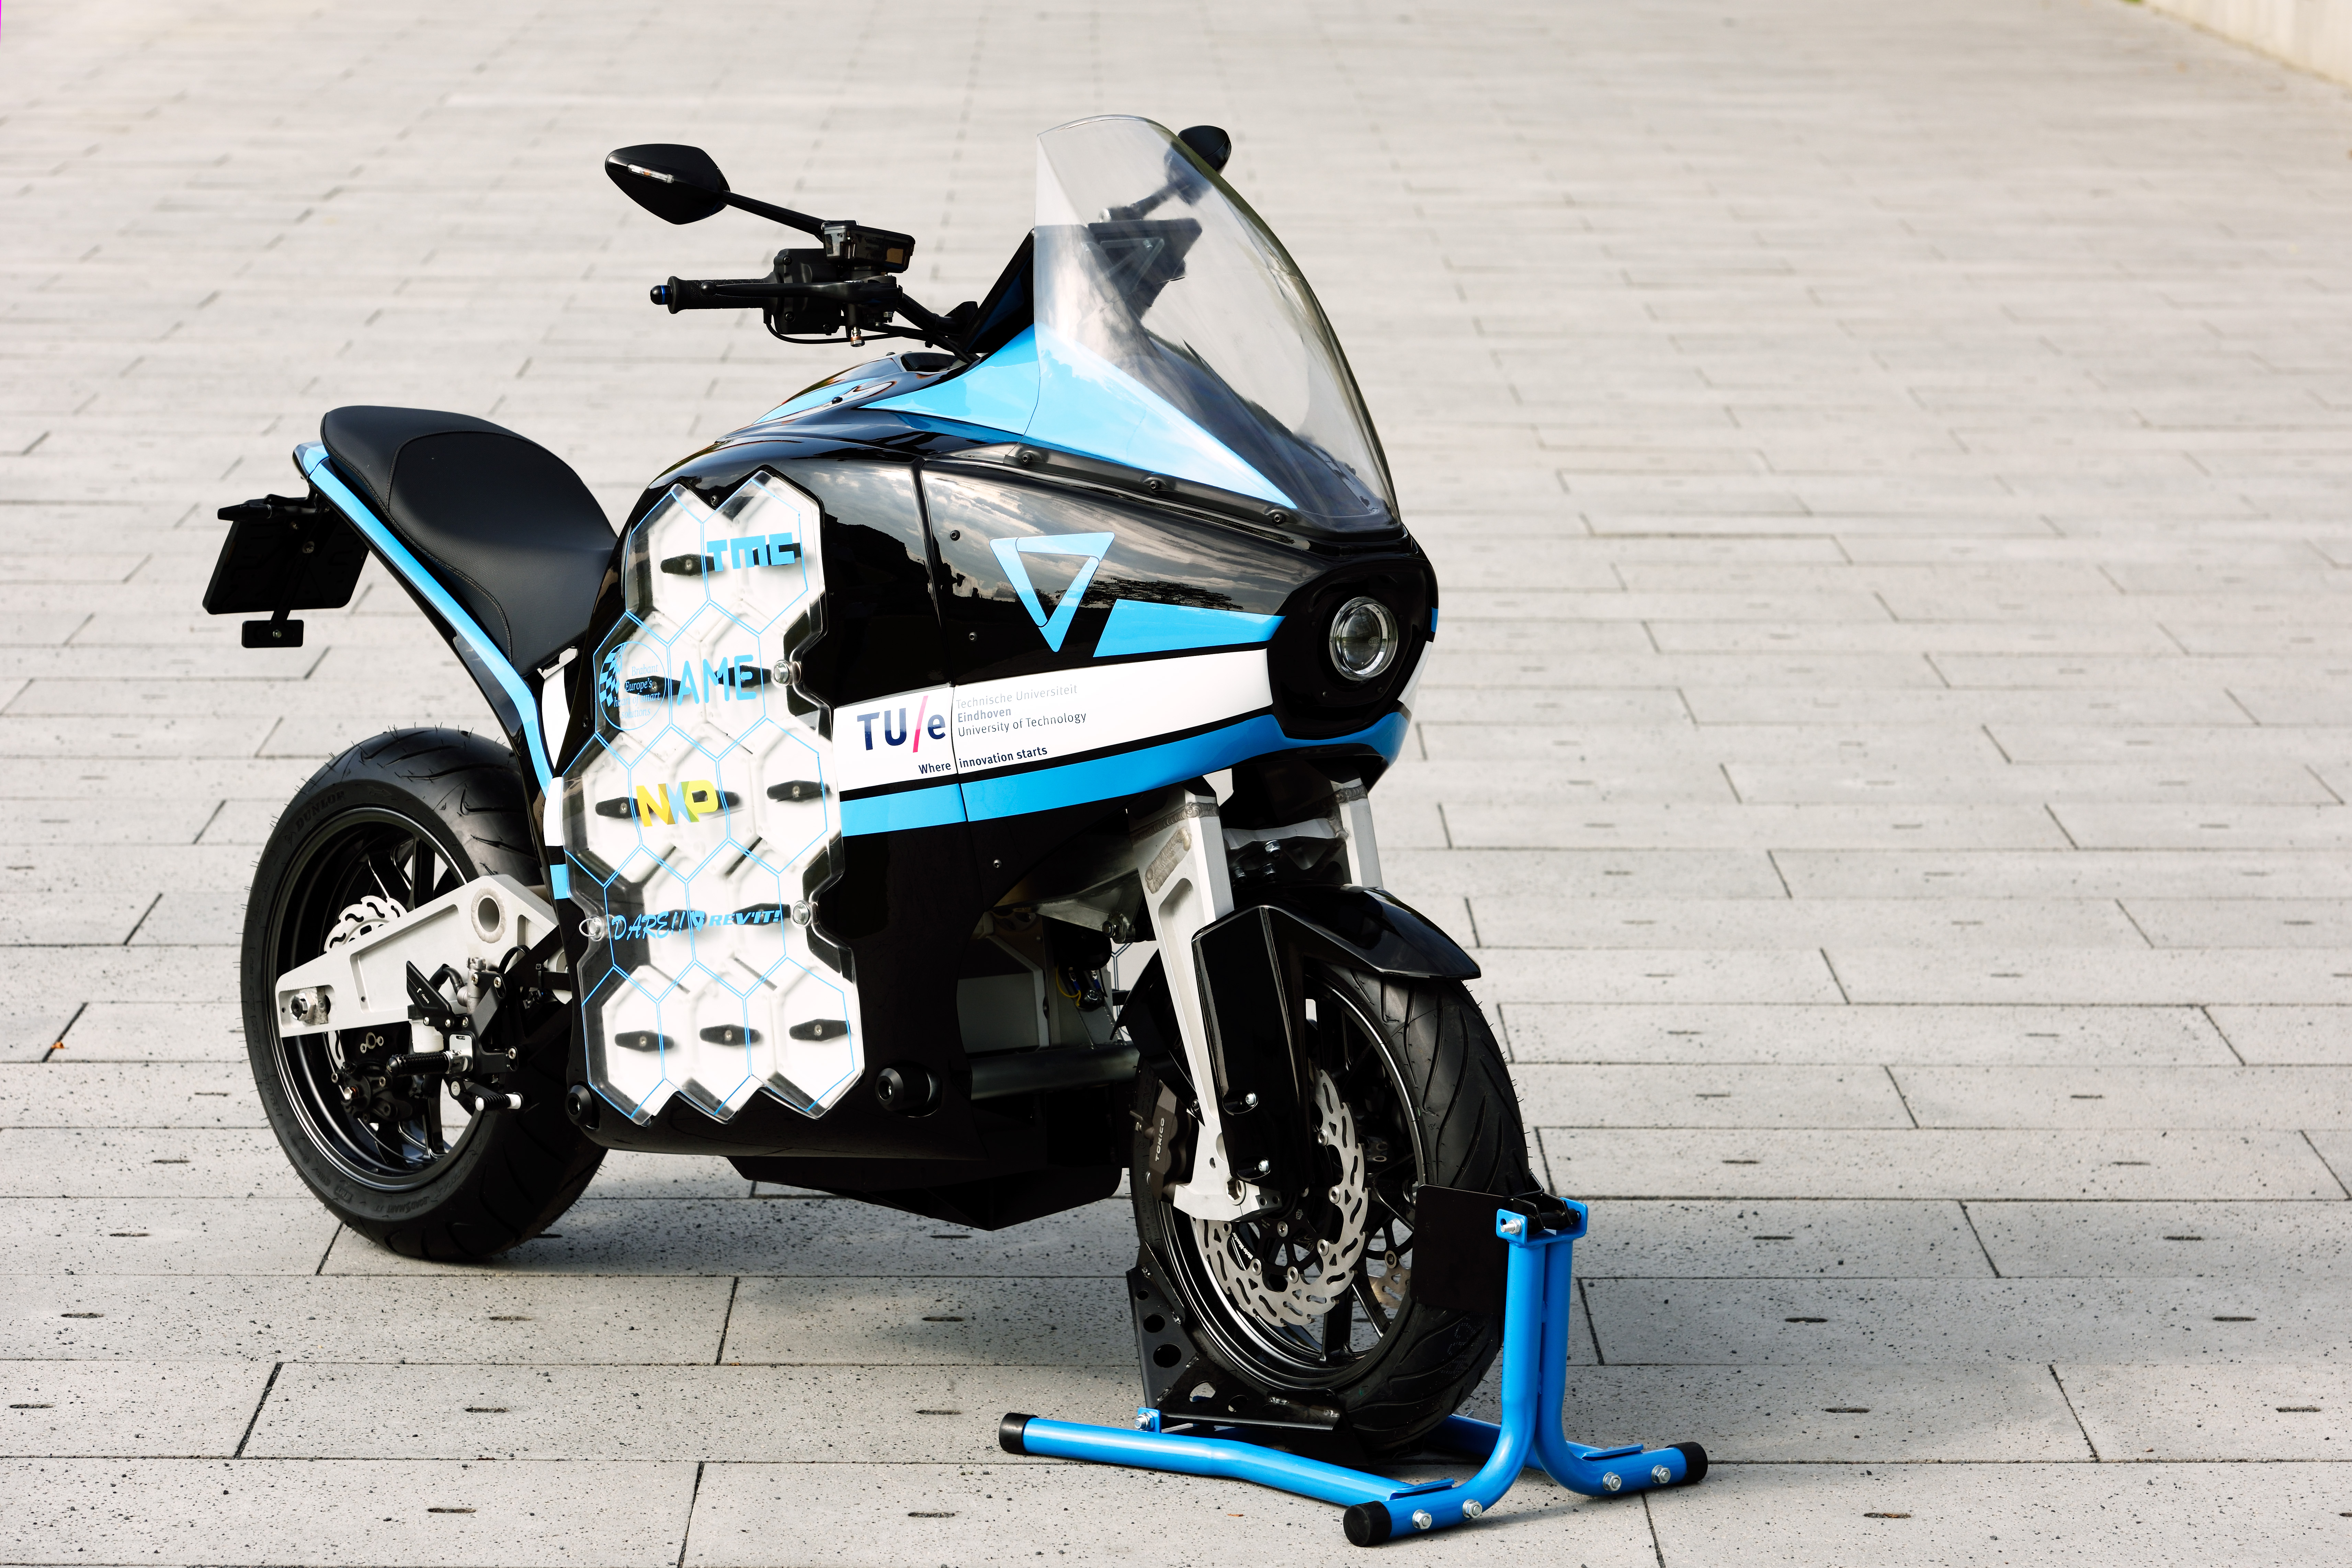 The electric bike with a 236-mile range